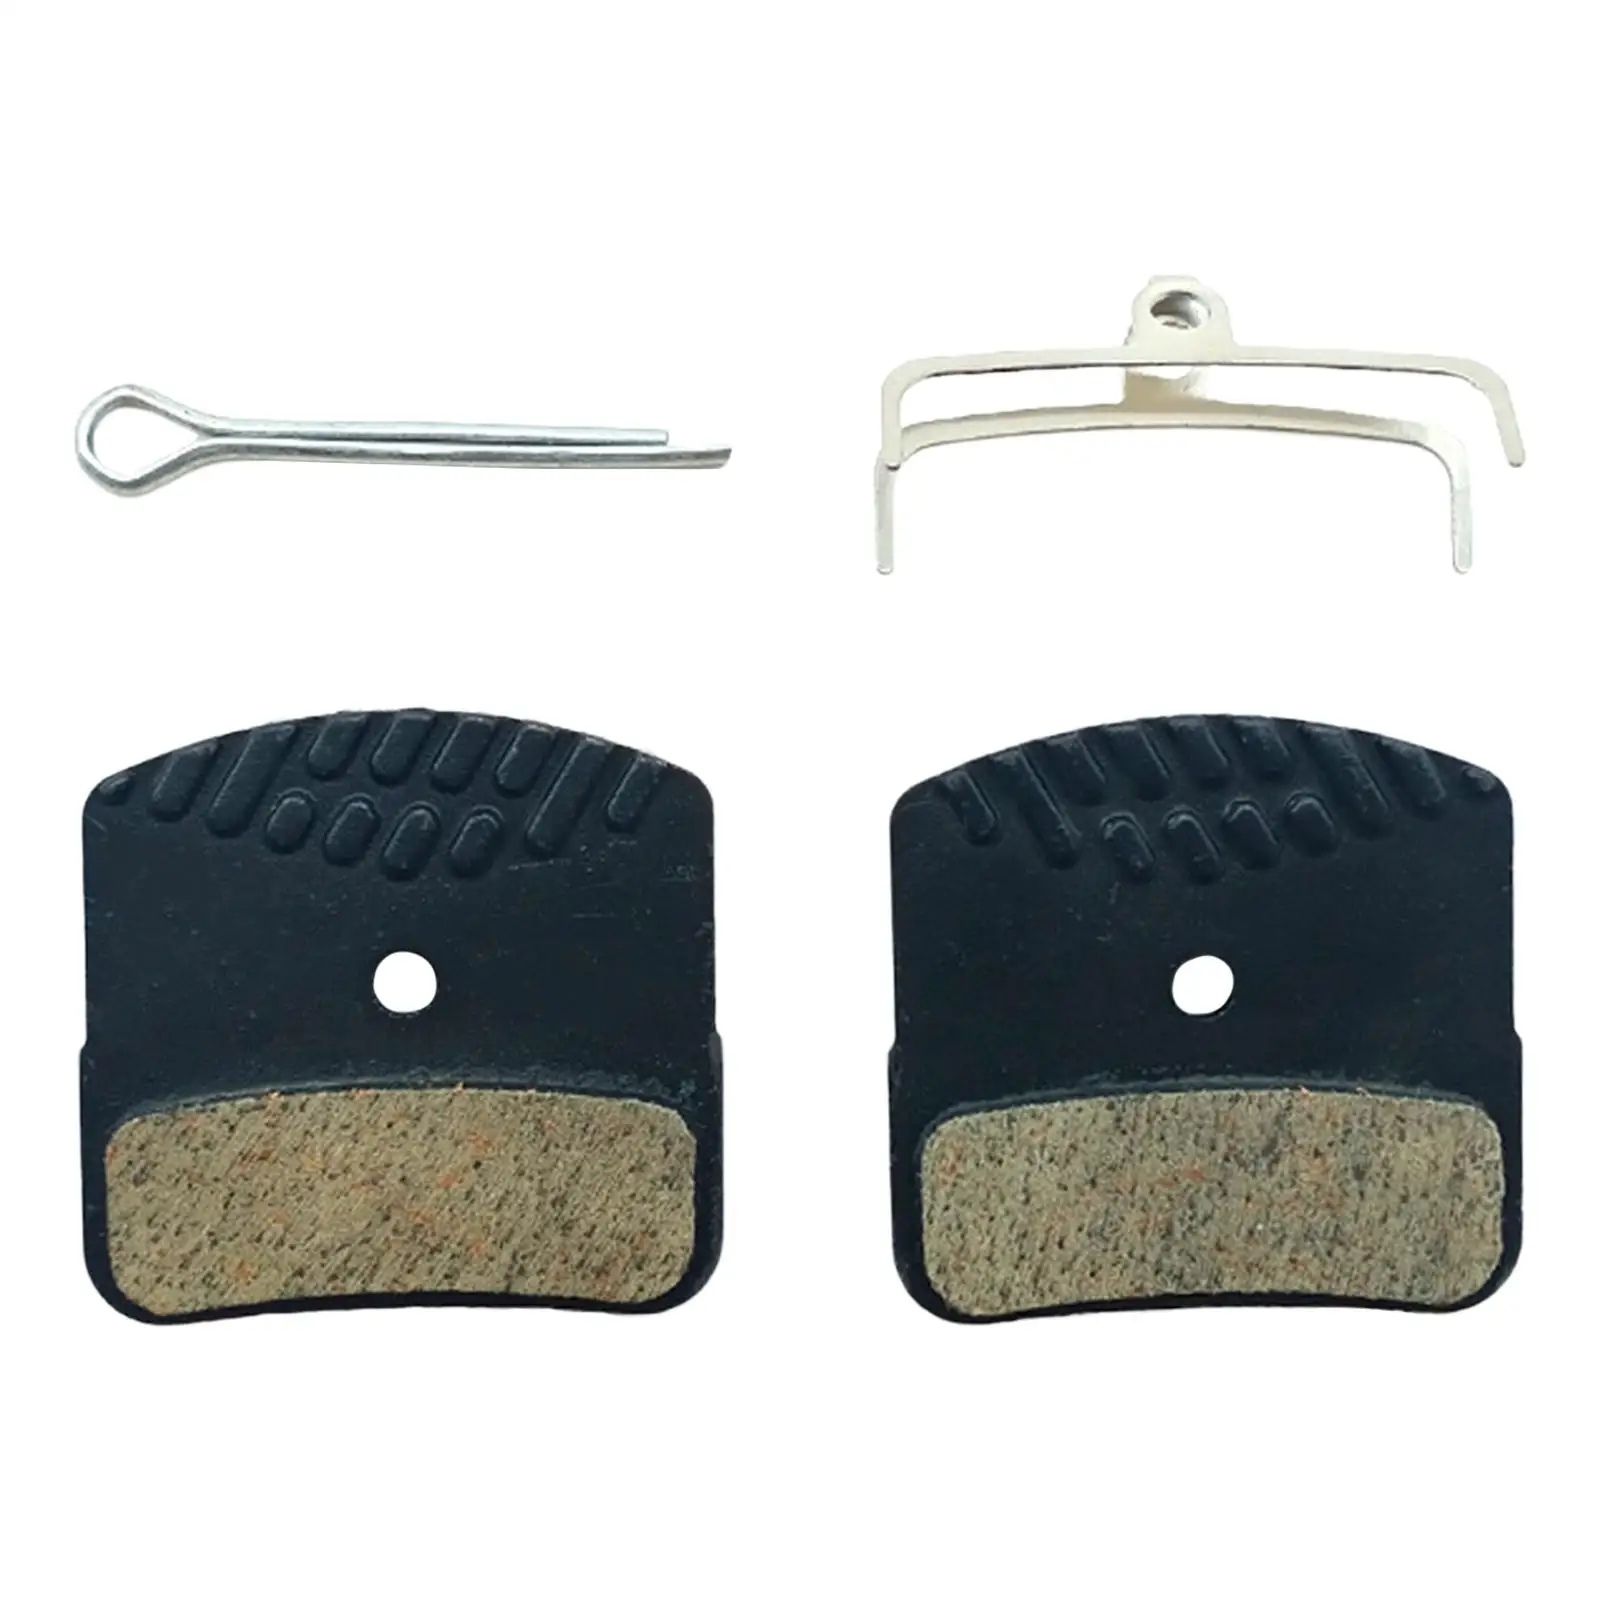 2 Pieces Bike Disc Brake Pads Bicycle Brake Pad for Q13RS Q11TS Q10Y Cycling Accessories